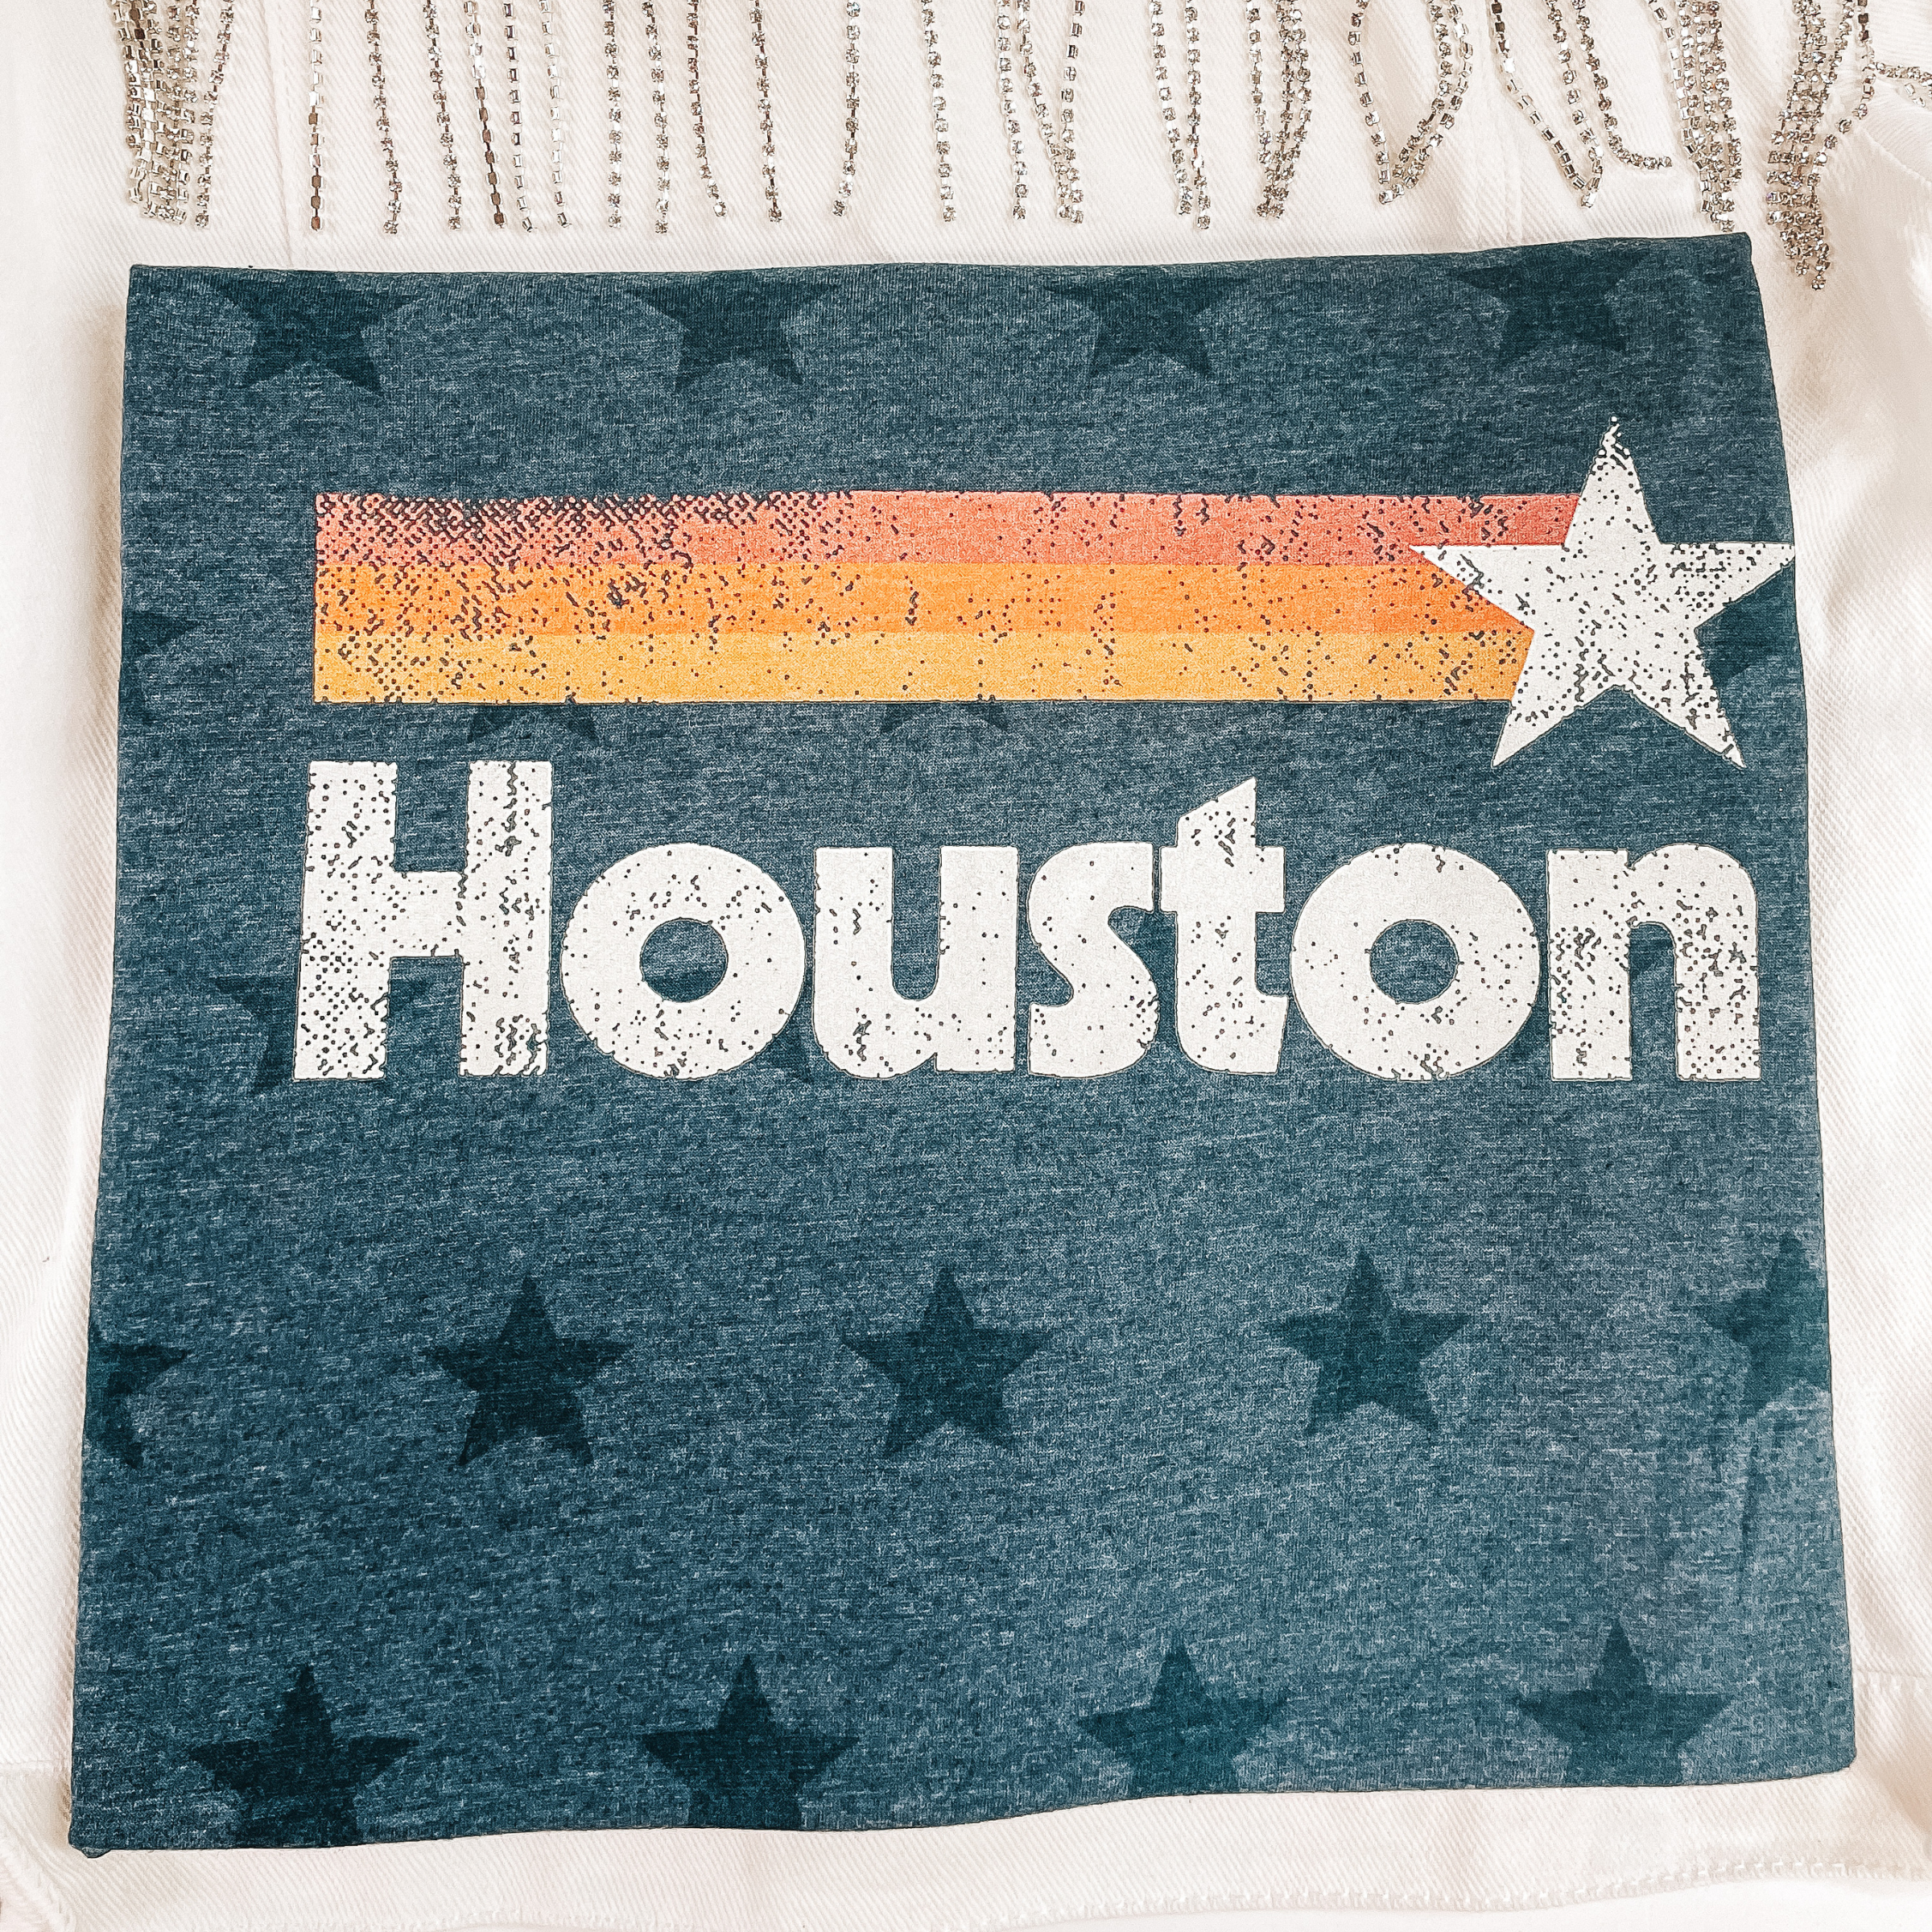 A folded tee shirt that is heather navy blue with a star print. The tee shirt has a graphic of a shooting star that says "Houston" in white letters underneath. Pictured on a white background with a white denim jacket. with crystal fringe.